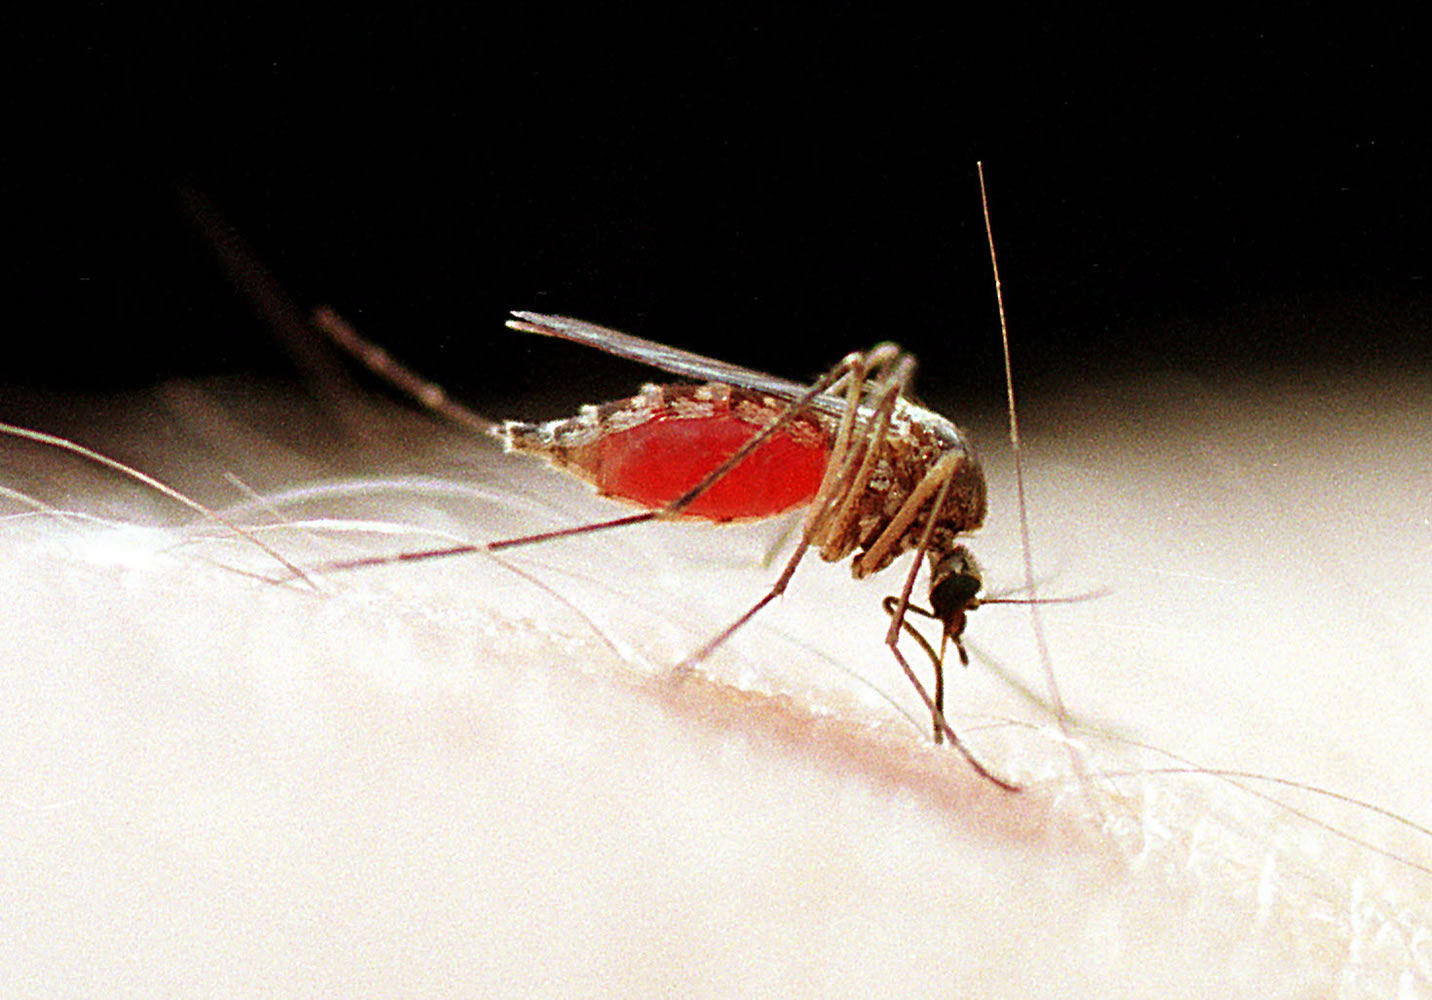 A teenager is the Clark County's first person to contract the West Nile virus since 2006.